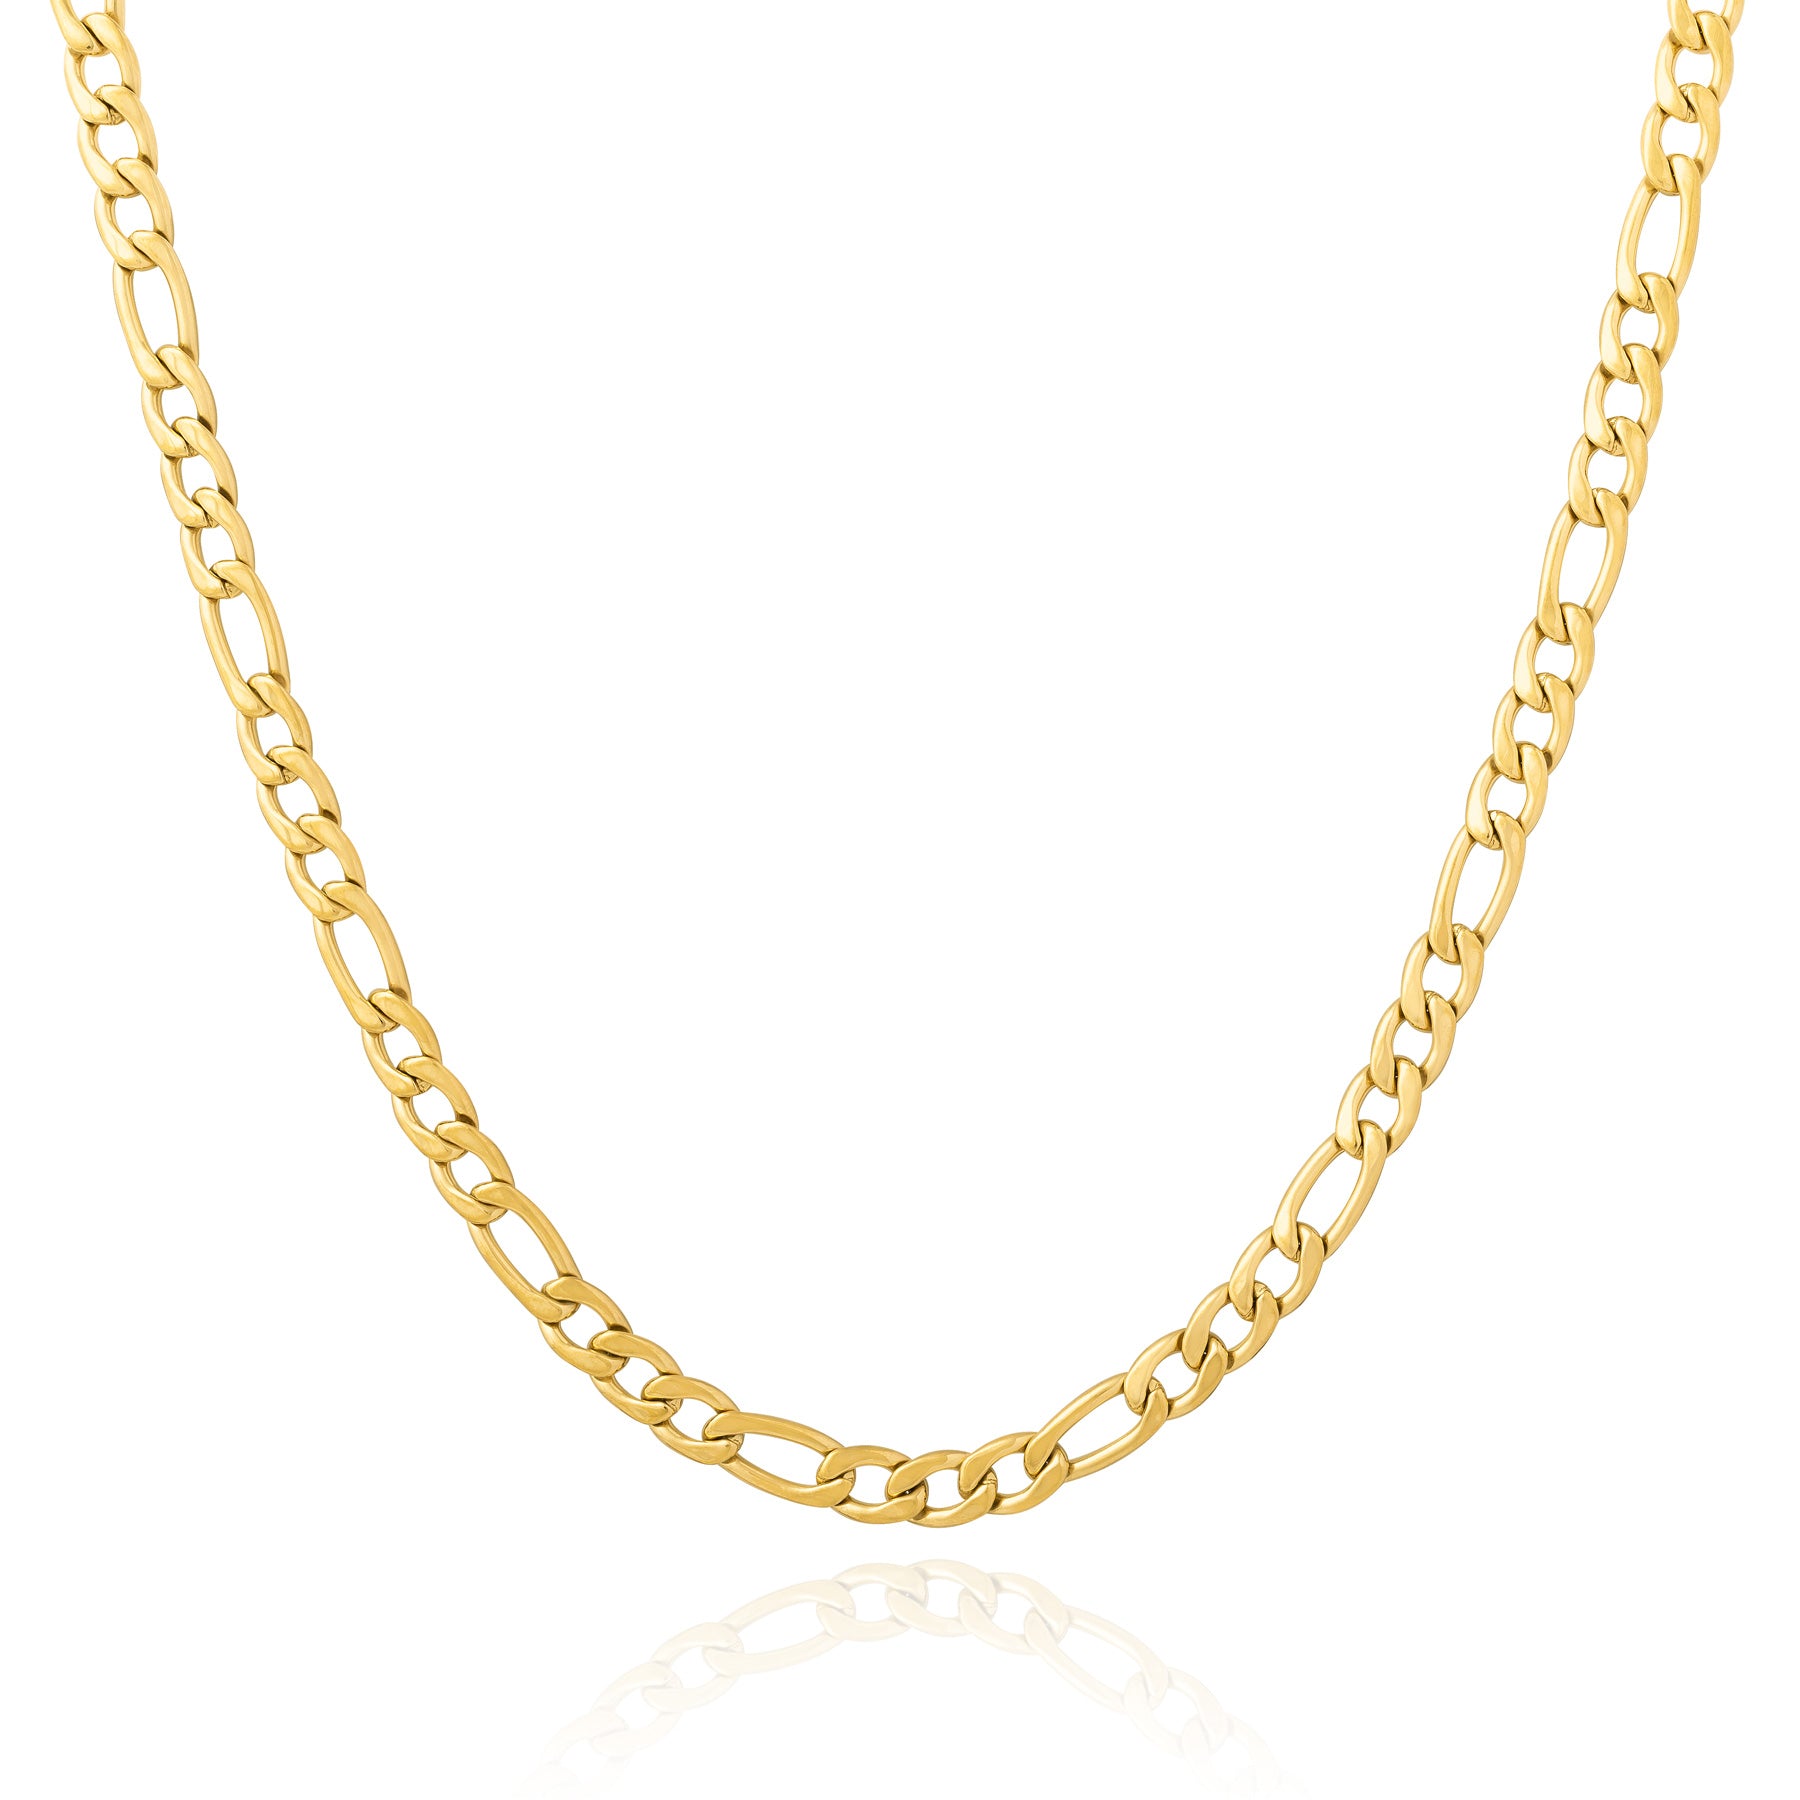 Figaro link chain necklace in gold on white background